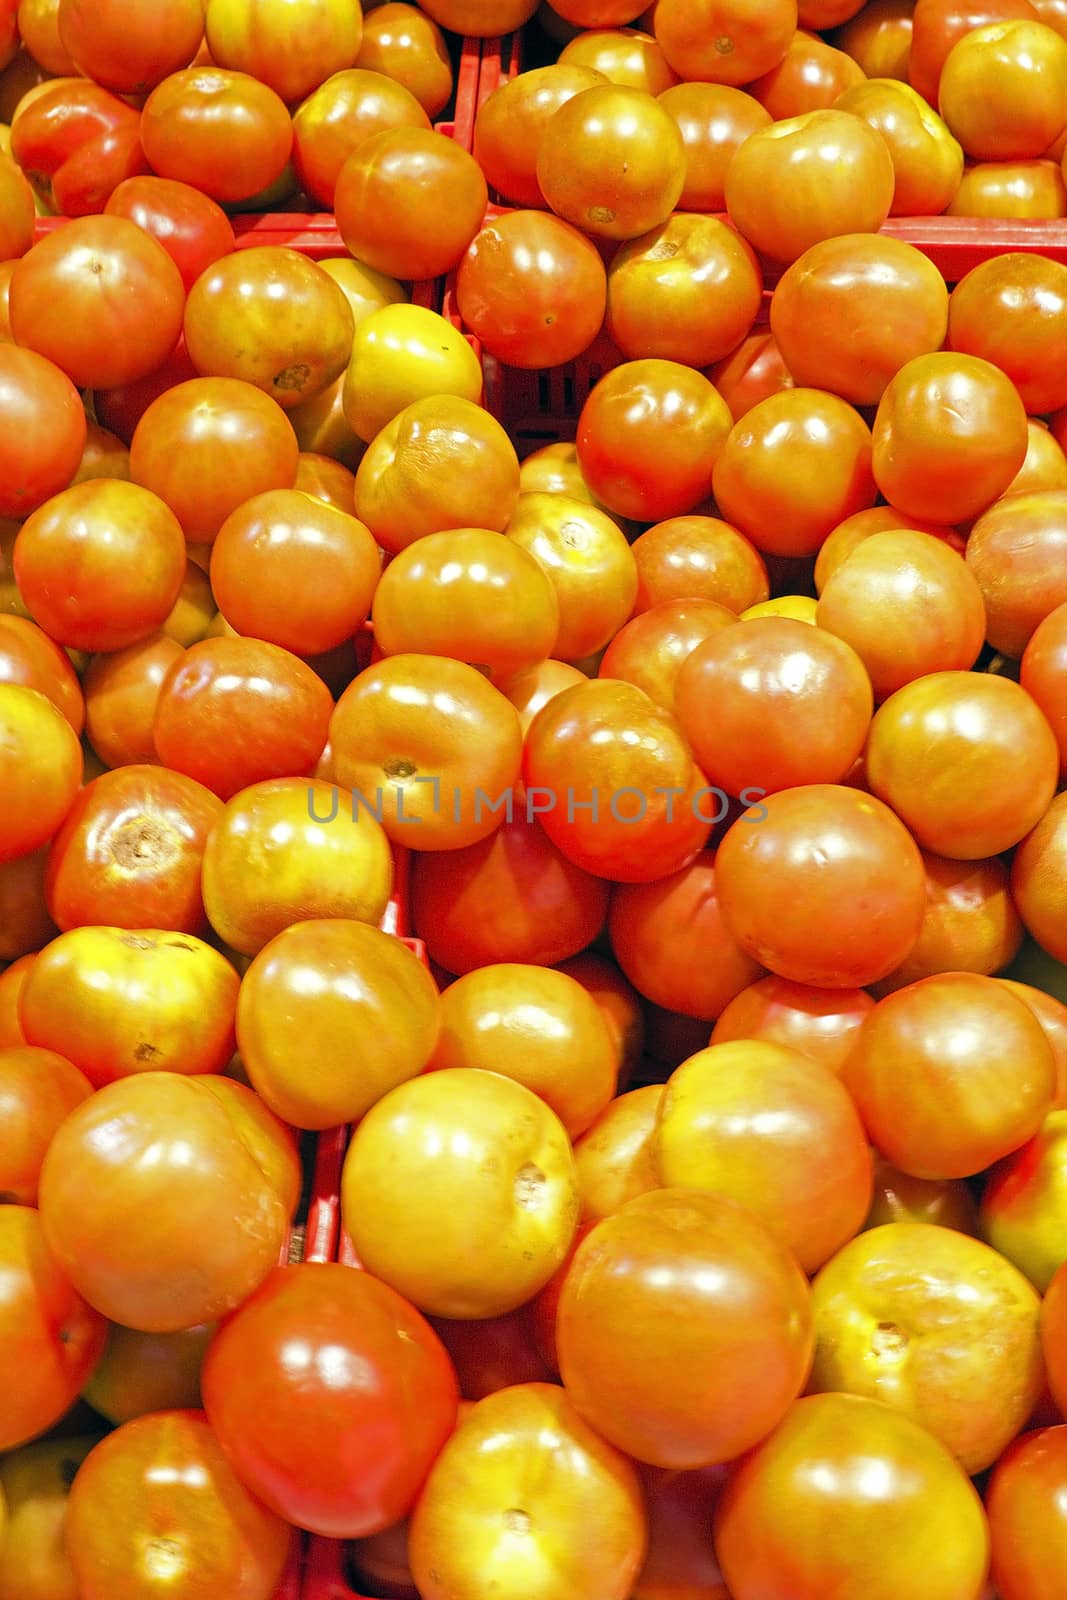 Tomatoes in the supermarket